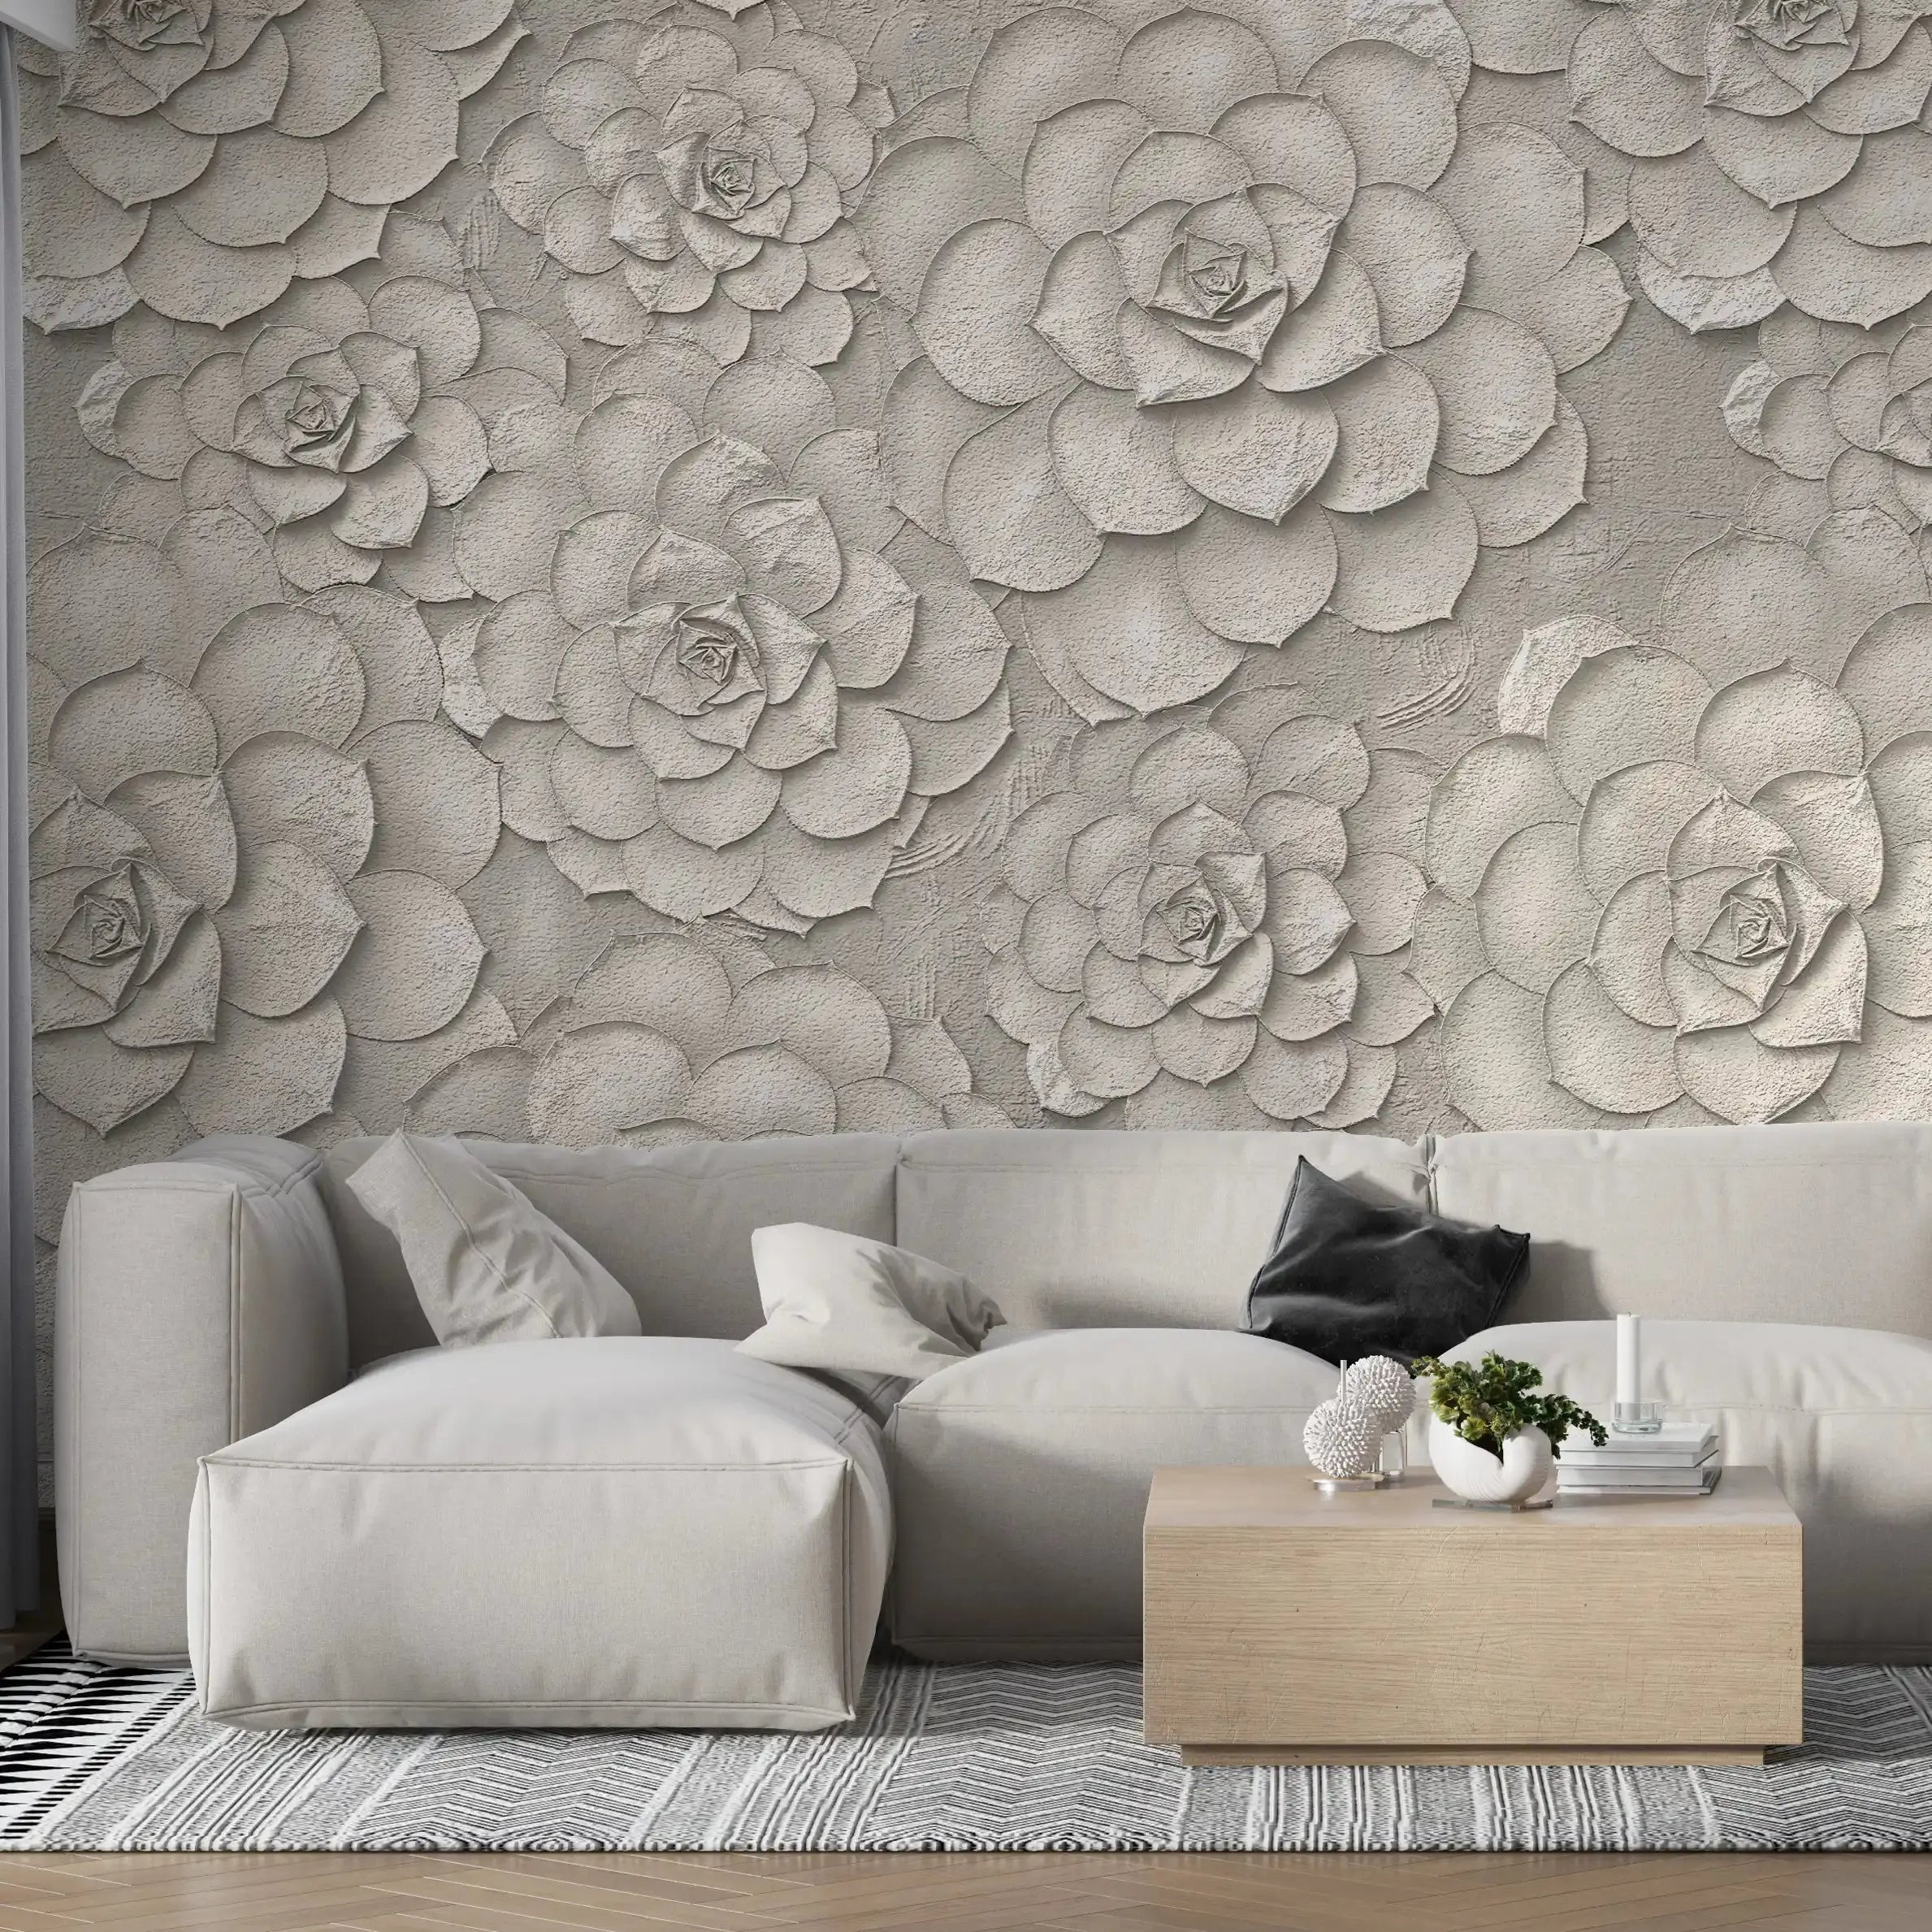 3012-E / Peel and Stick Wallpaper: Grey Rose and White Floral, Easy Install, Self Adhesive Wall Paper for Any Room - Artevella